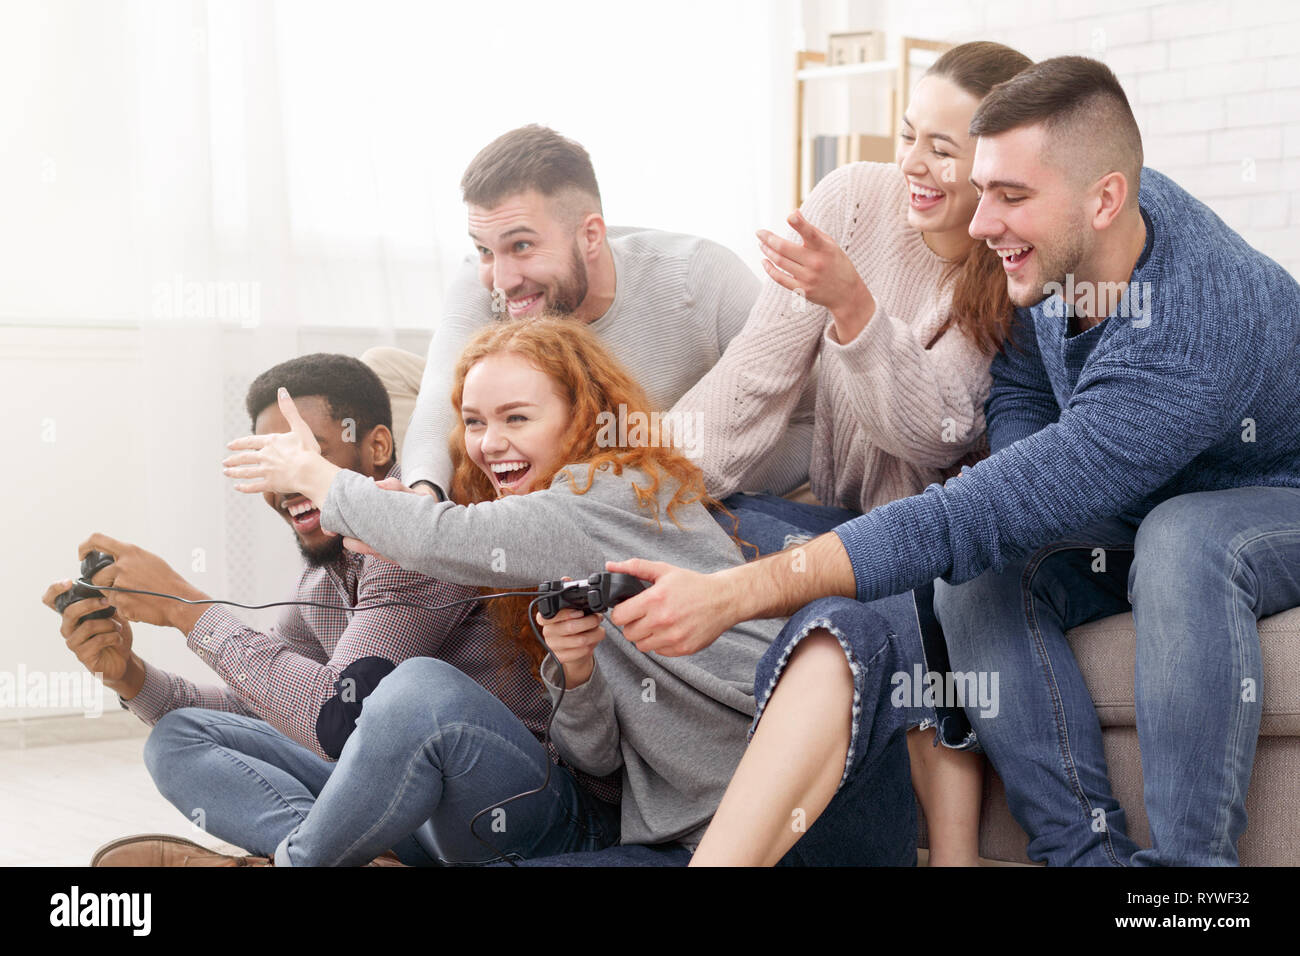 Excited friends playing video games together, having fun Stock Photo